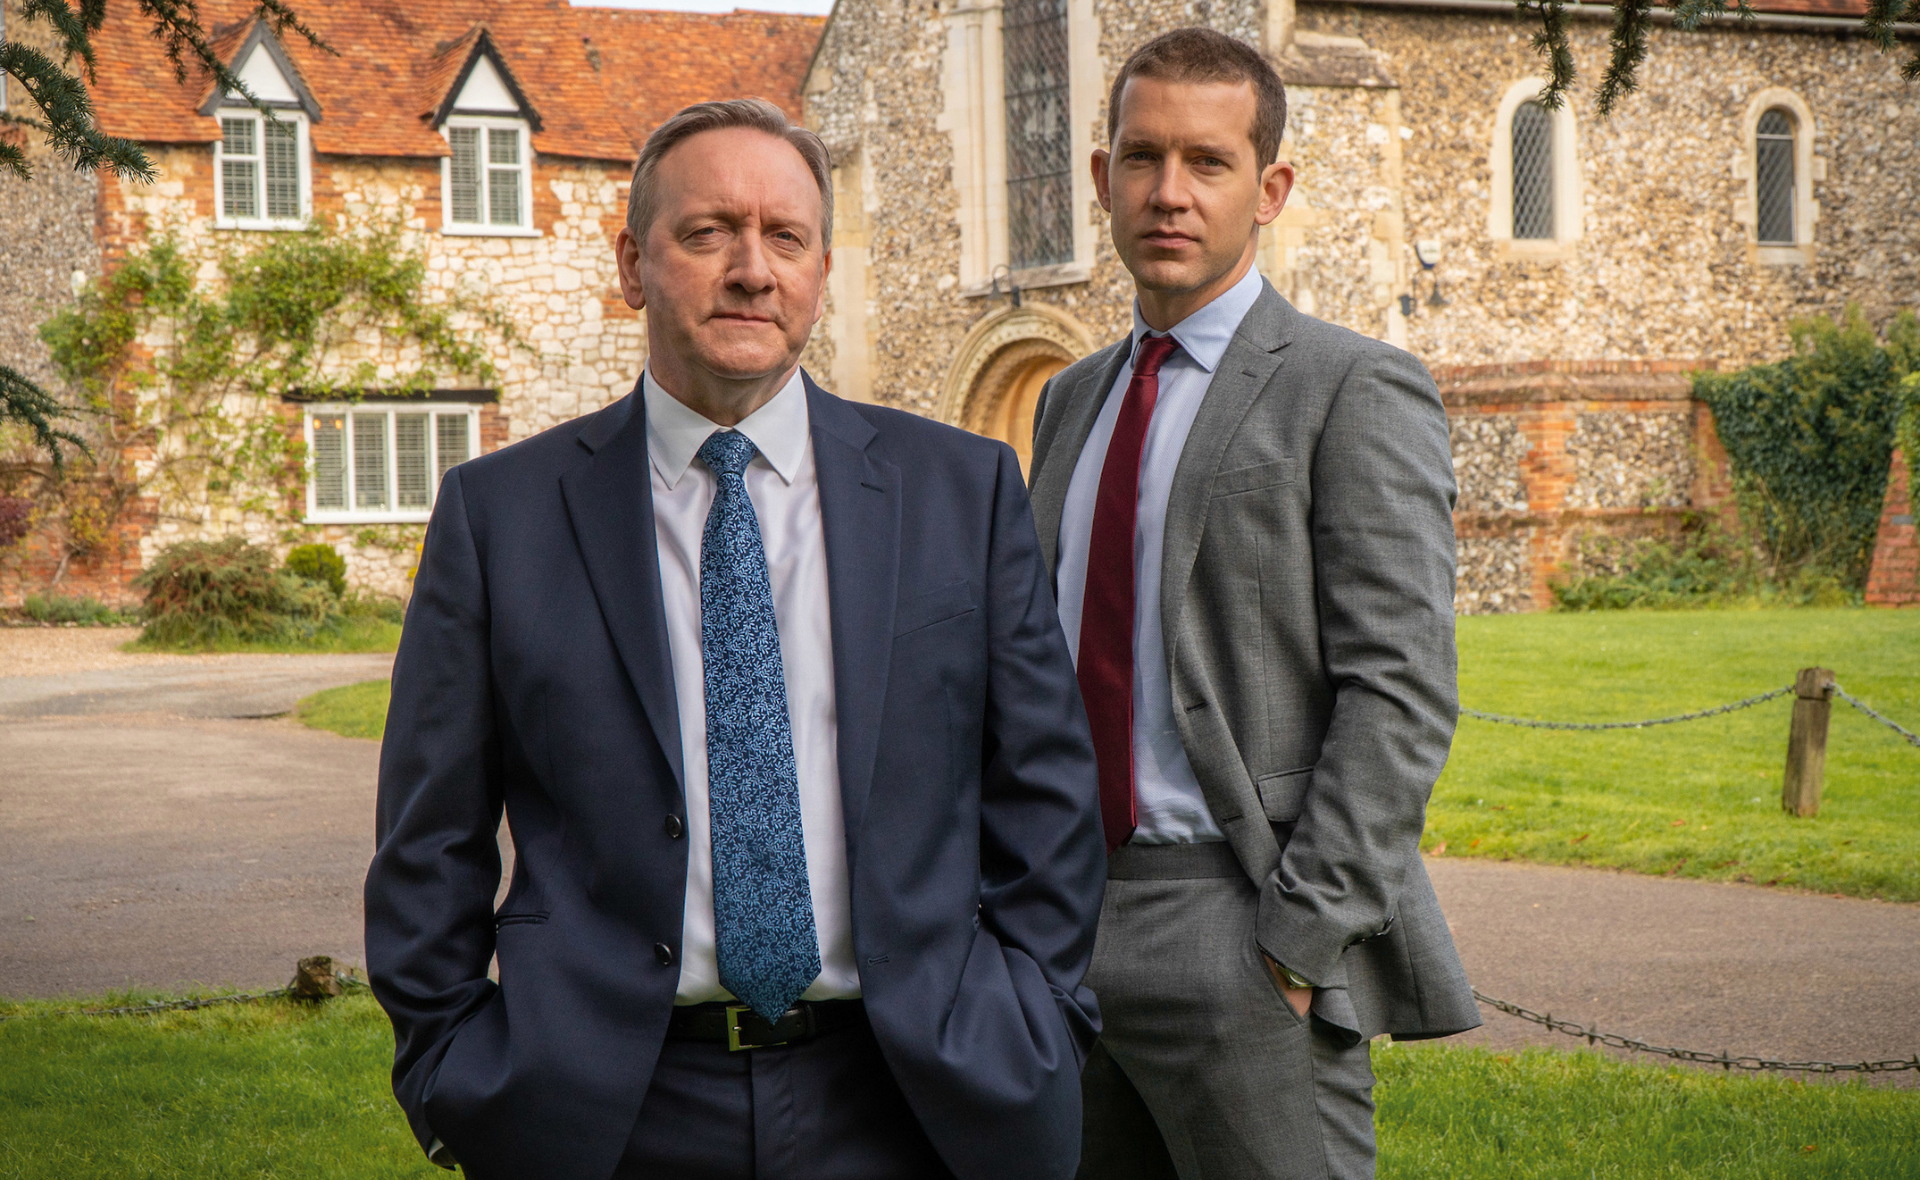 EXCLUSIVE: Midsomer Murders’ Neil Dudgeon is secretly the troublemaker on set